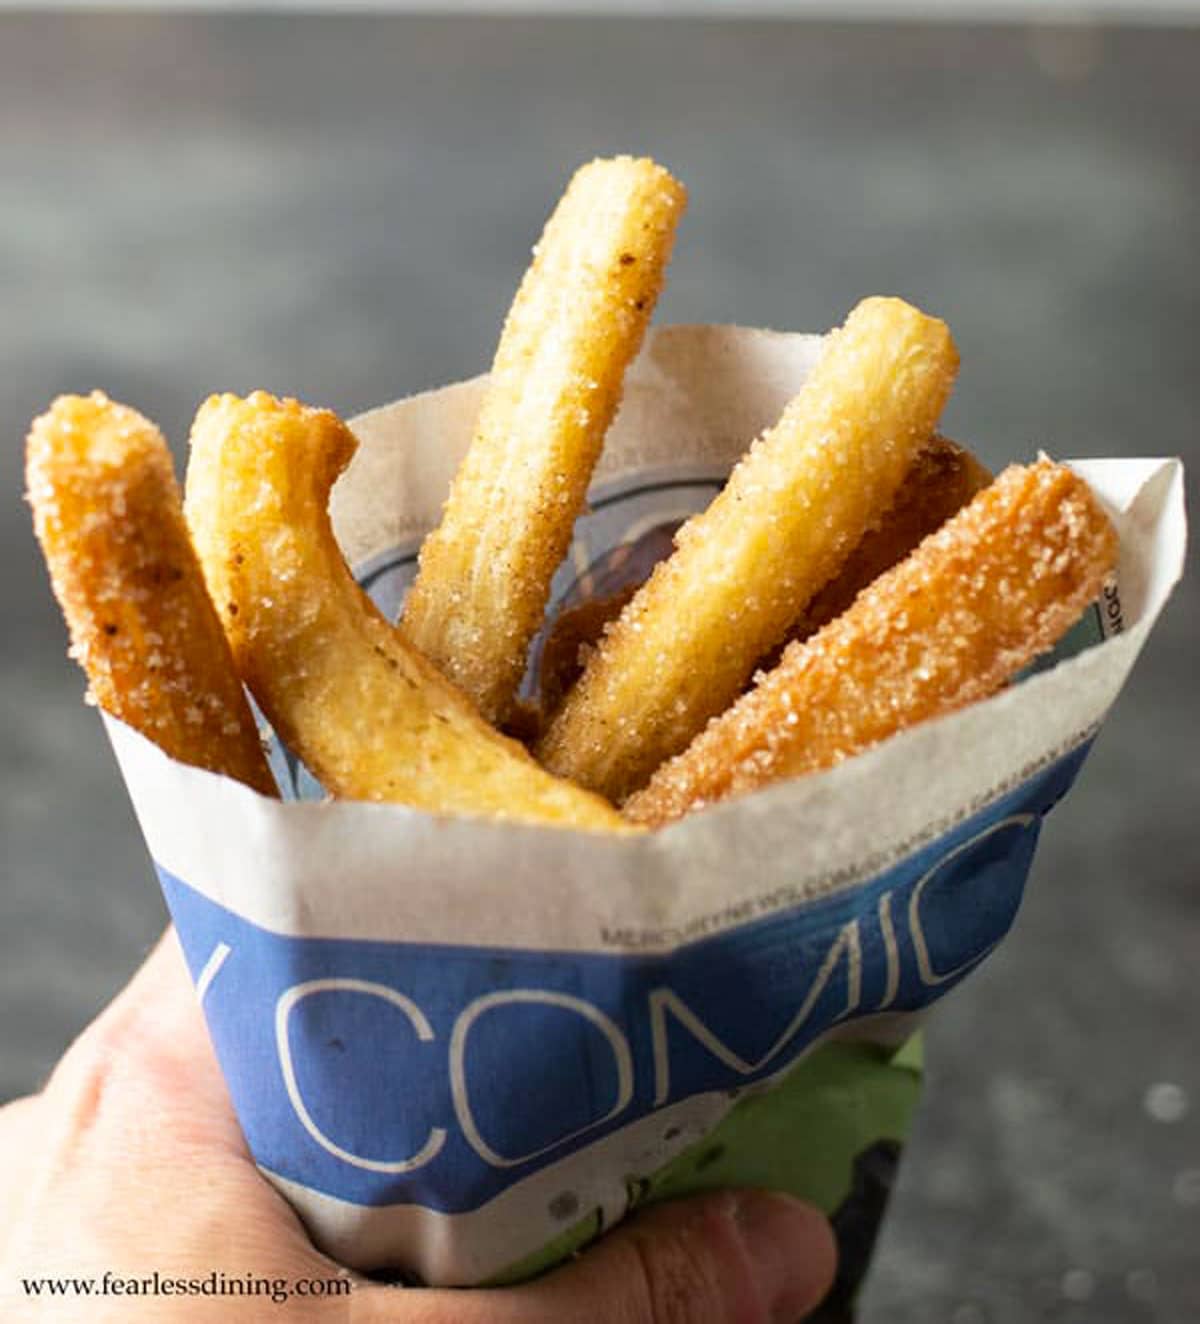 Fried churros wrapped in the comic section of newspaper.